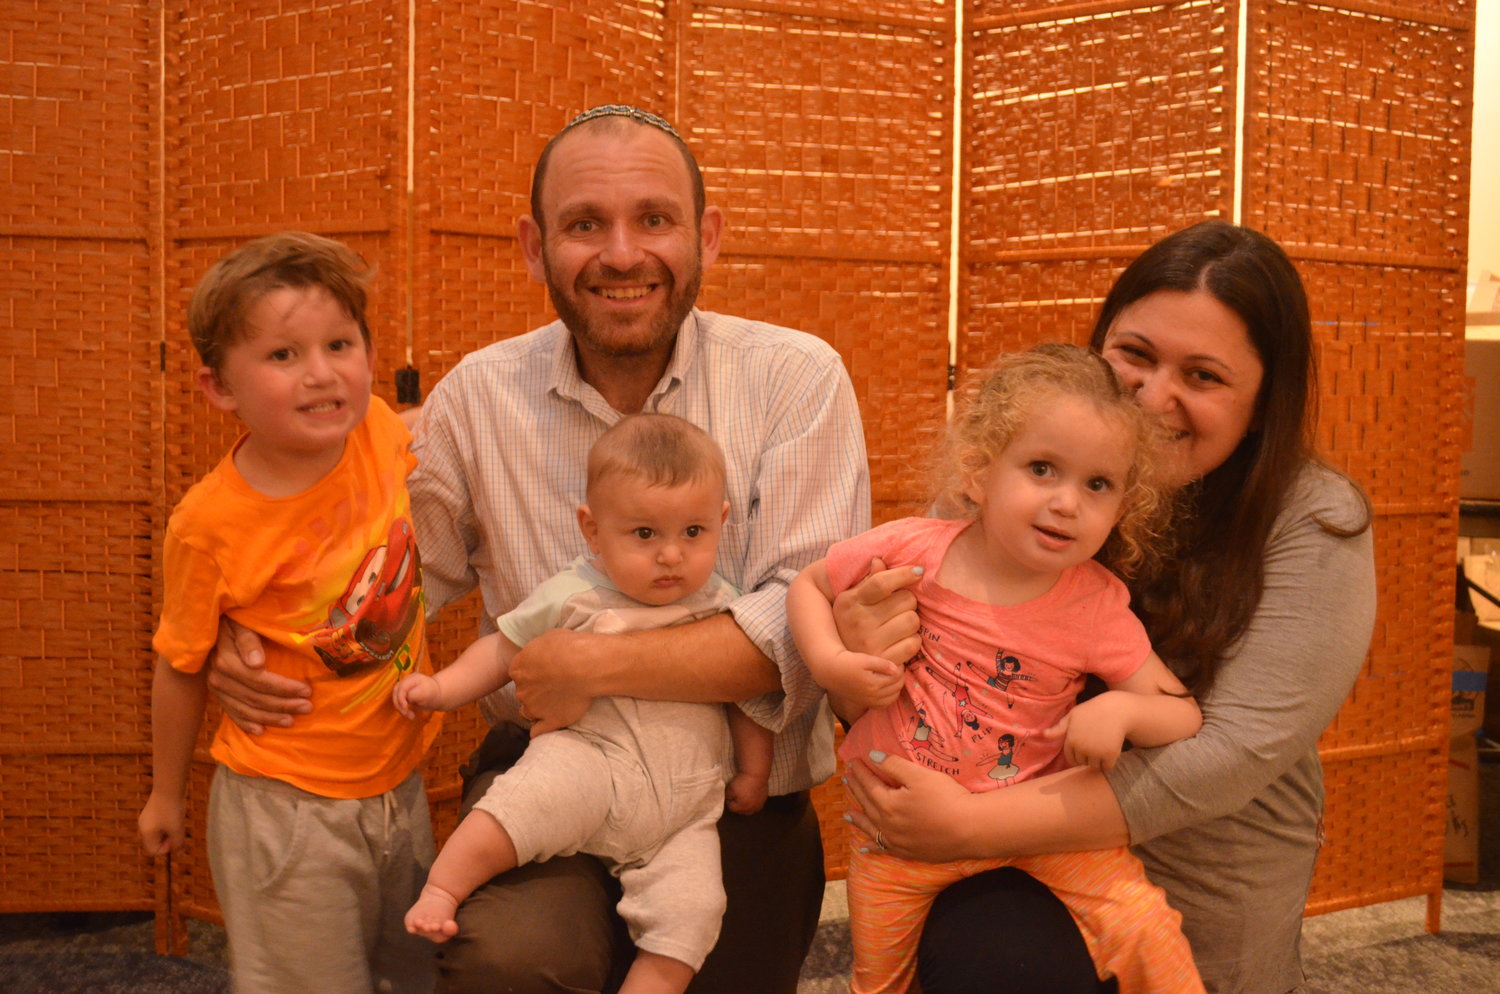 The family of Rabbi Joshua Dorsch is ready to create new roots in Merrick as he takes over spiritual leadership of Merrick Jewish Centre-Congregation Ohr Torah. Dorsch — with sons Nadav, left, and Avi, along with daughter Ziva and wife Stephanie.